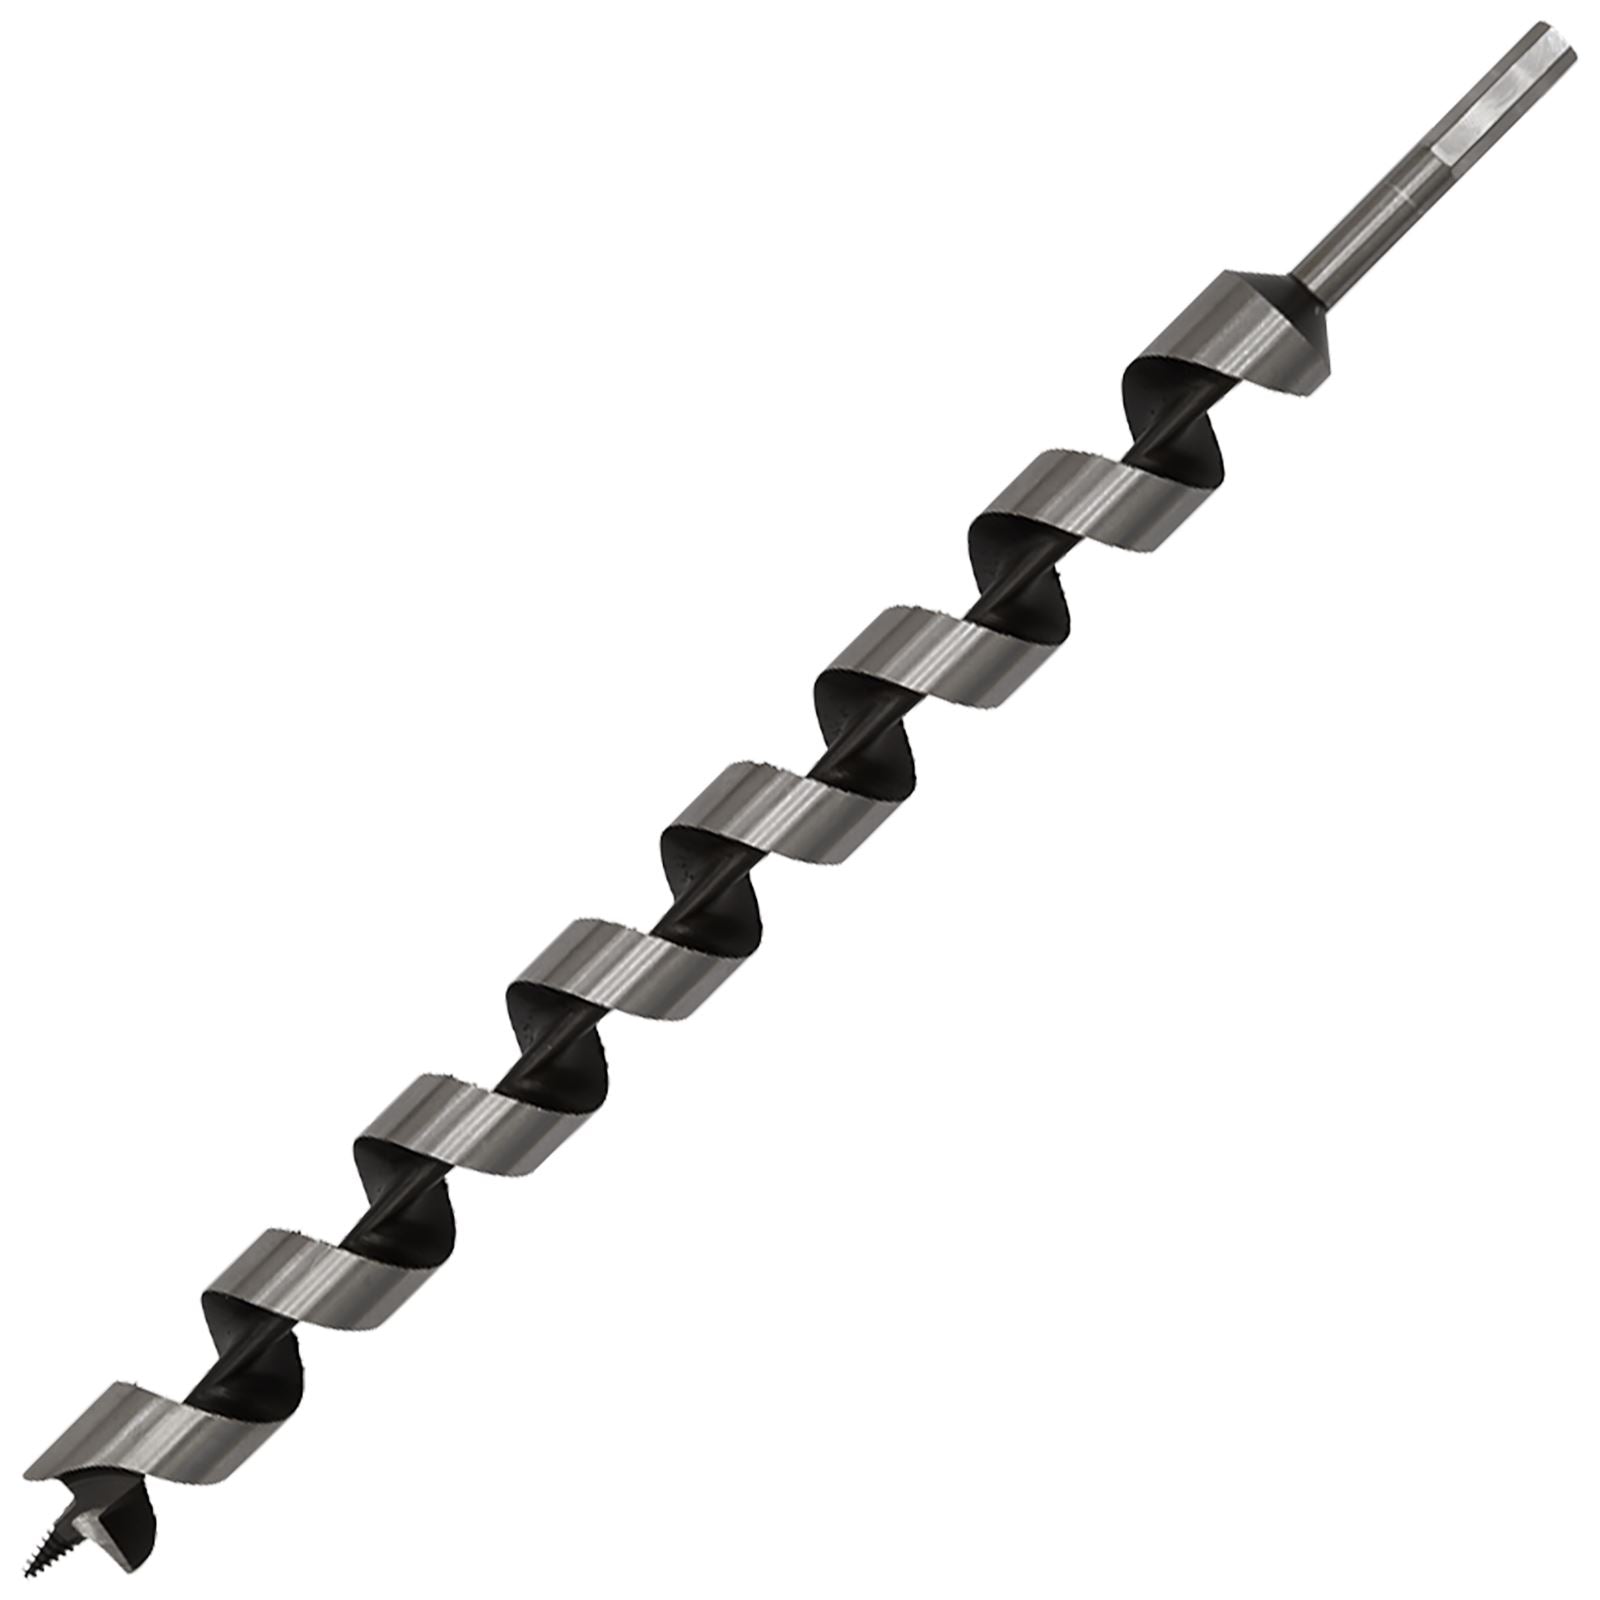 Worksafe by Sealey Auger Wood Drill Bit 32mm x 460mm